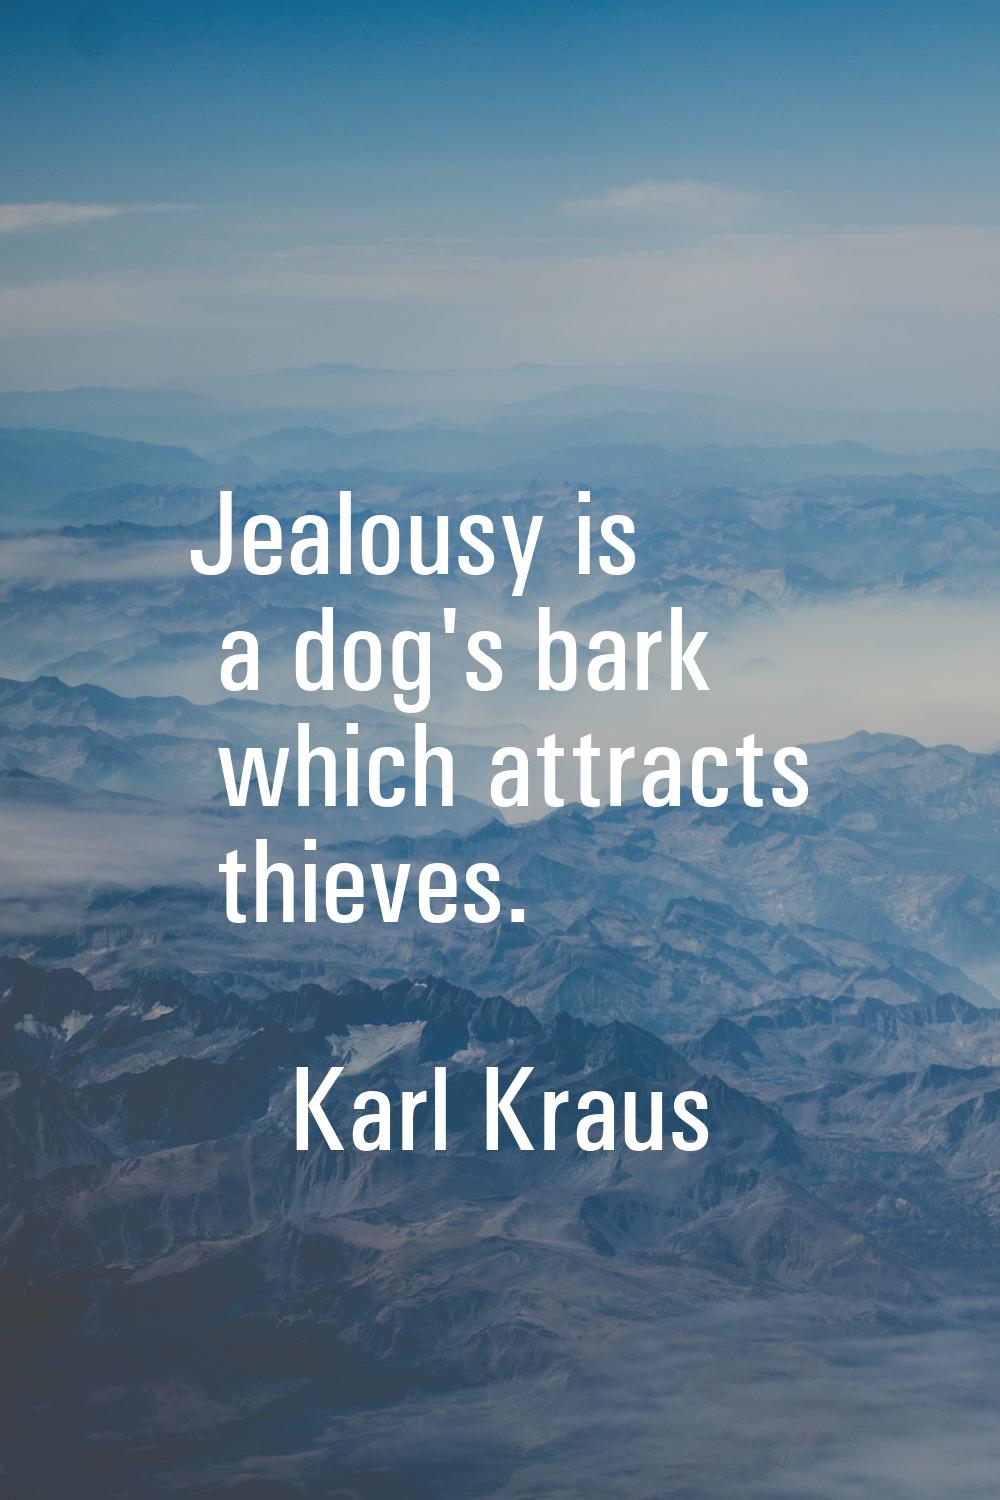 Jealousy is a dog's bark which attracts thieves.